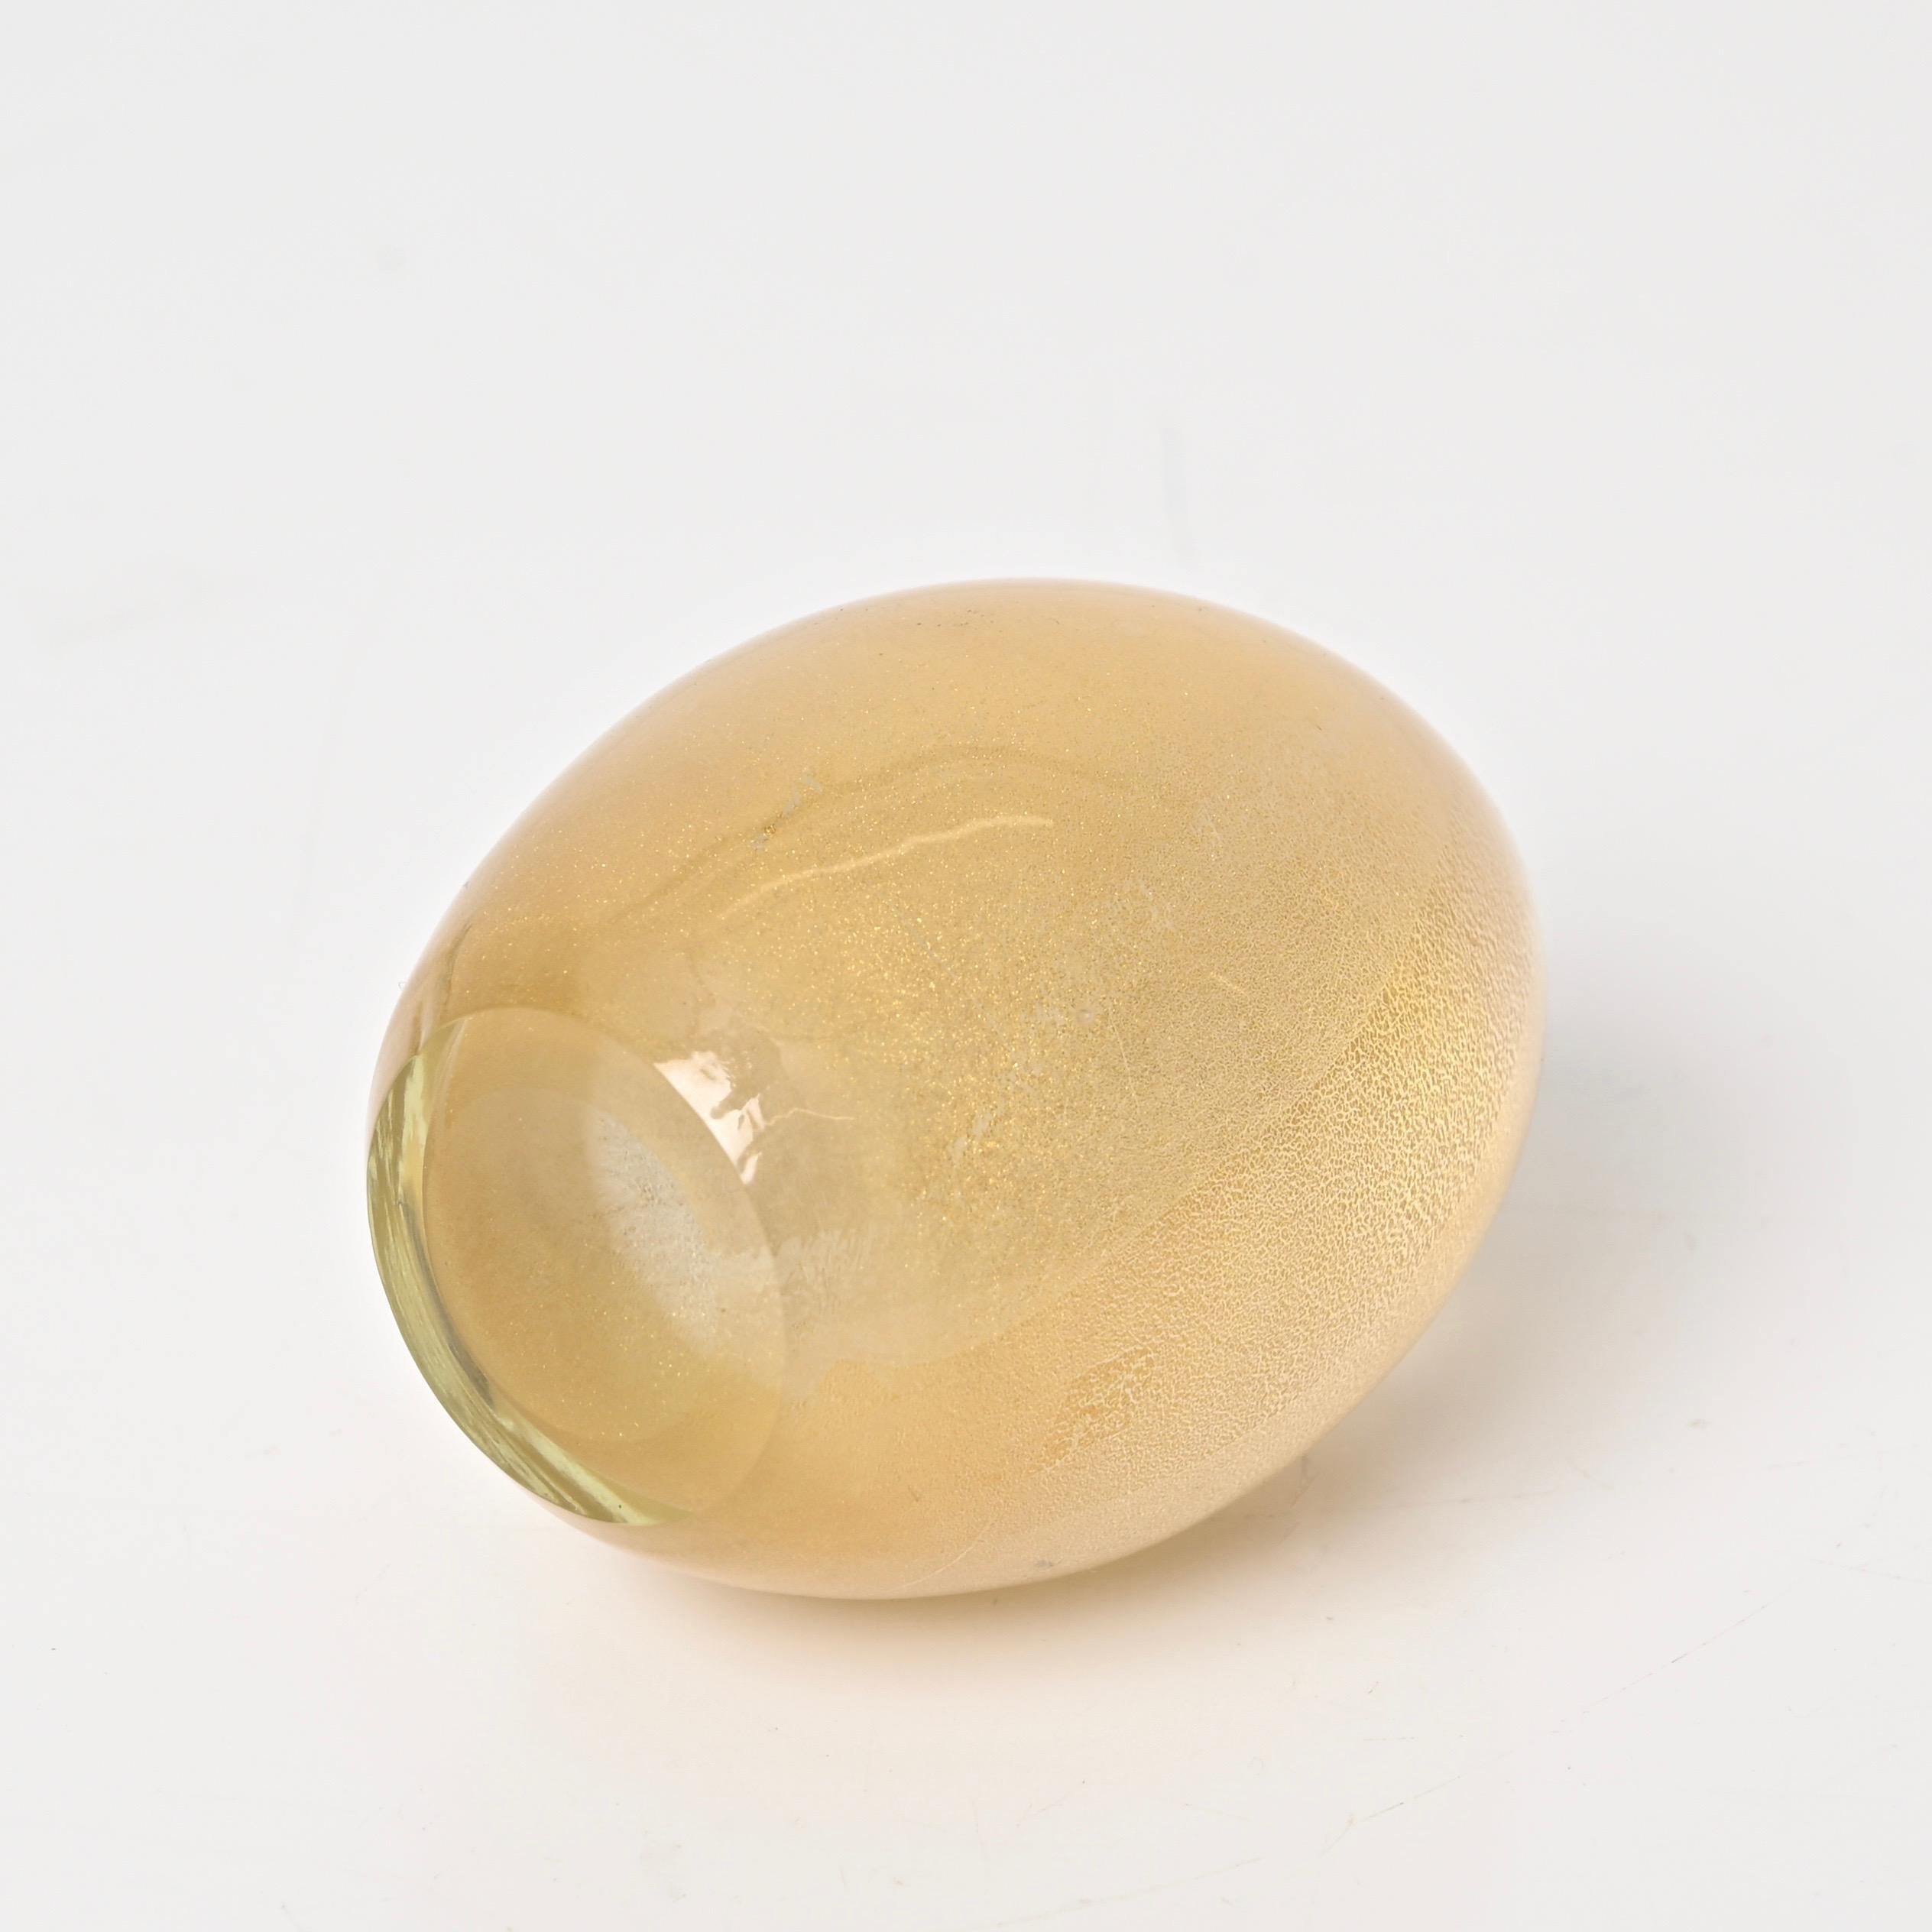 Seguso Murano Egg Paperweight in Murano Glass with Gold Dust, Italy 1950s For Sale 6